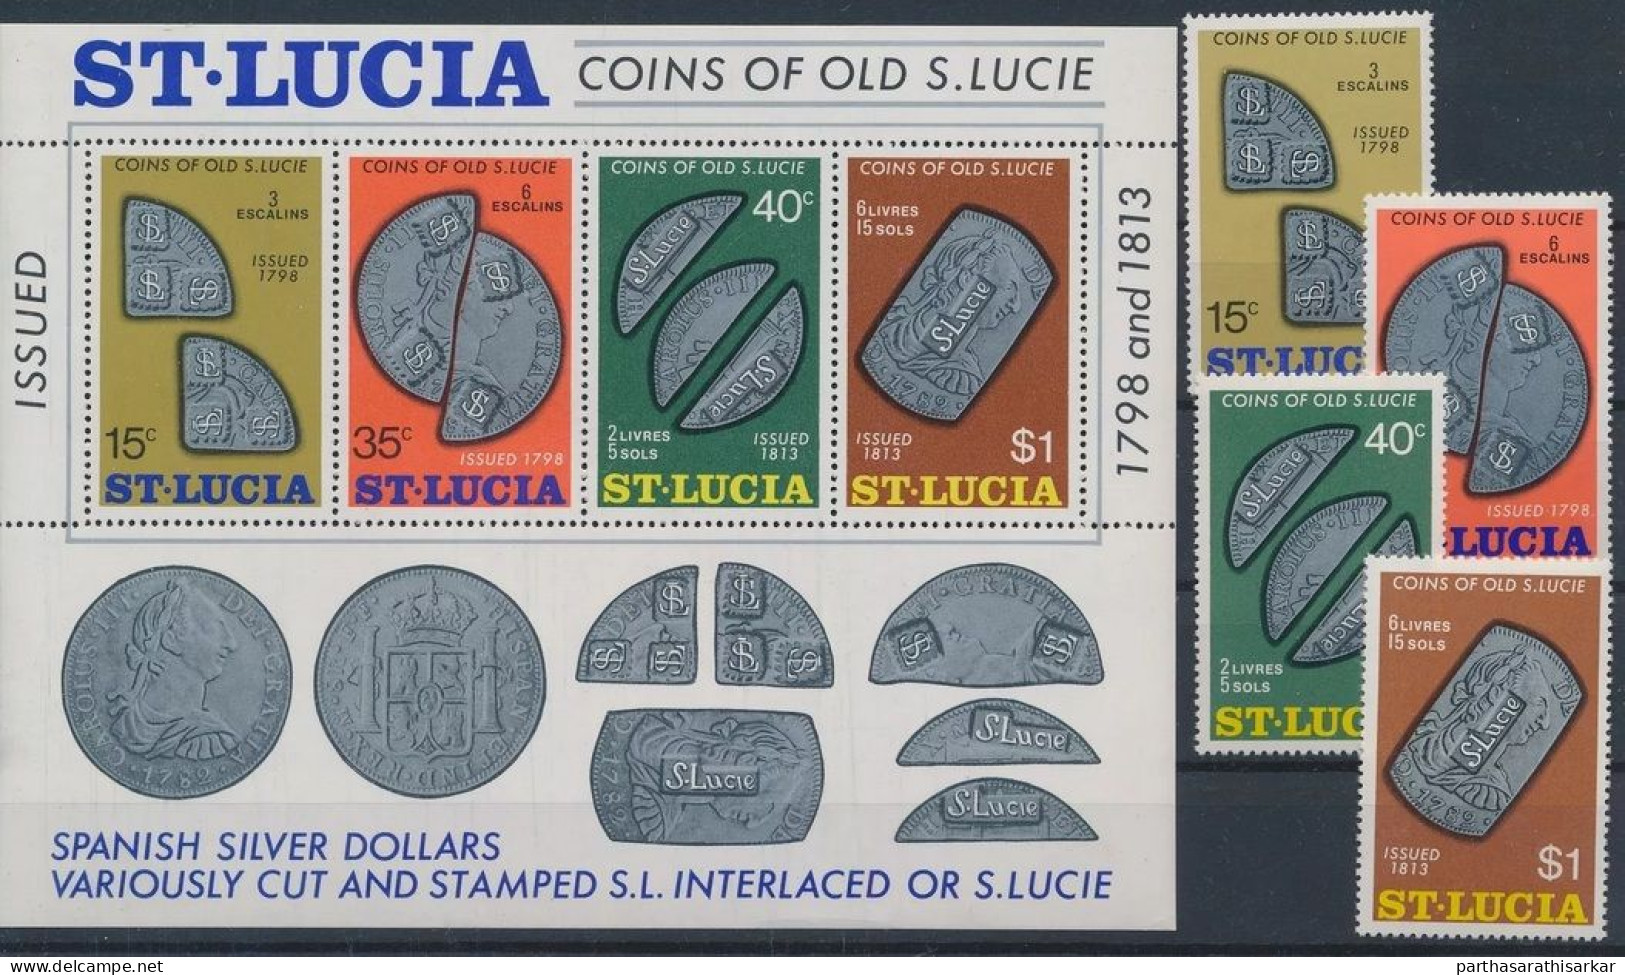 ST. LUCIA 1974 COINS OF OLD ST. LUCIA COMPLETE SET WITH MINIATURE SHEET MS MNH - Coins